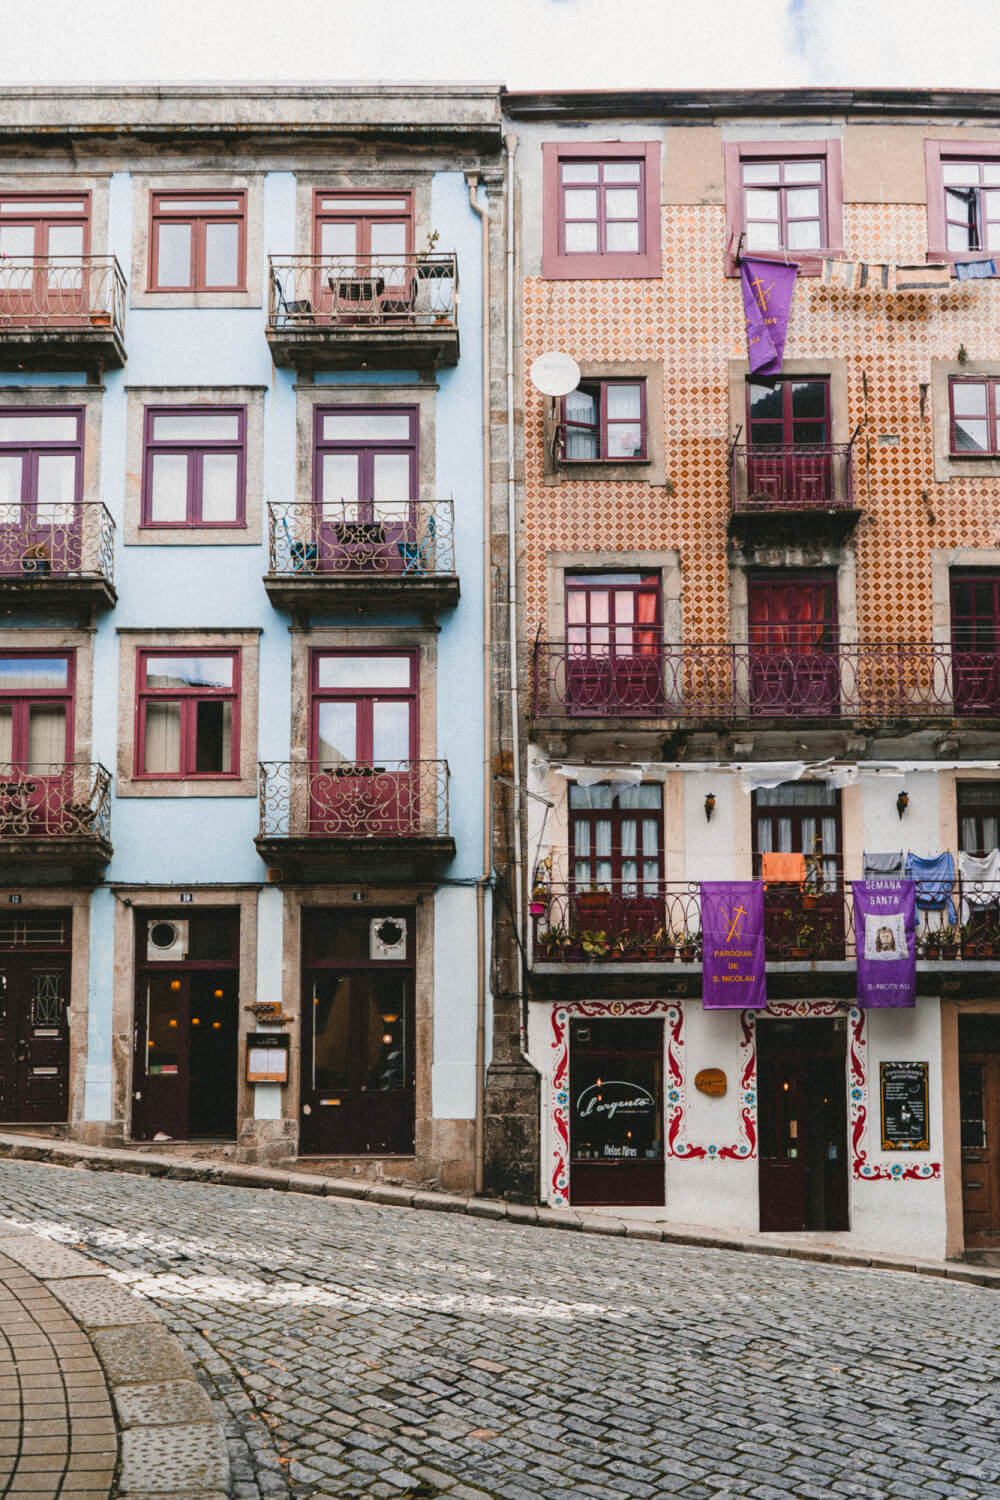 tips to travel to portugal